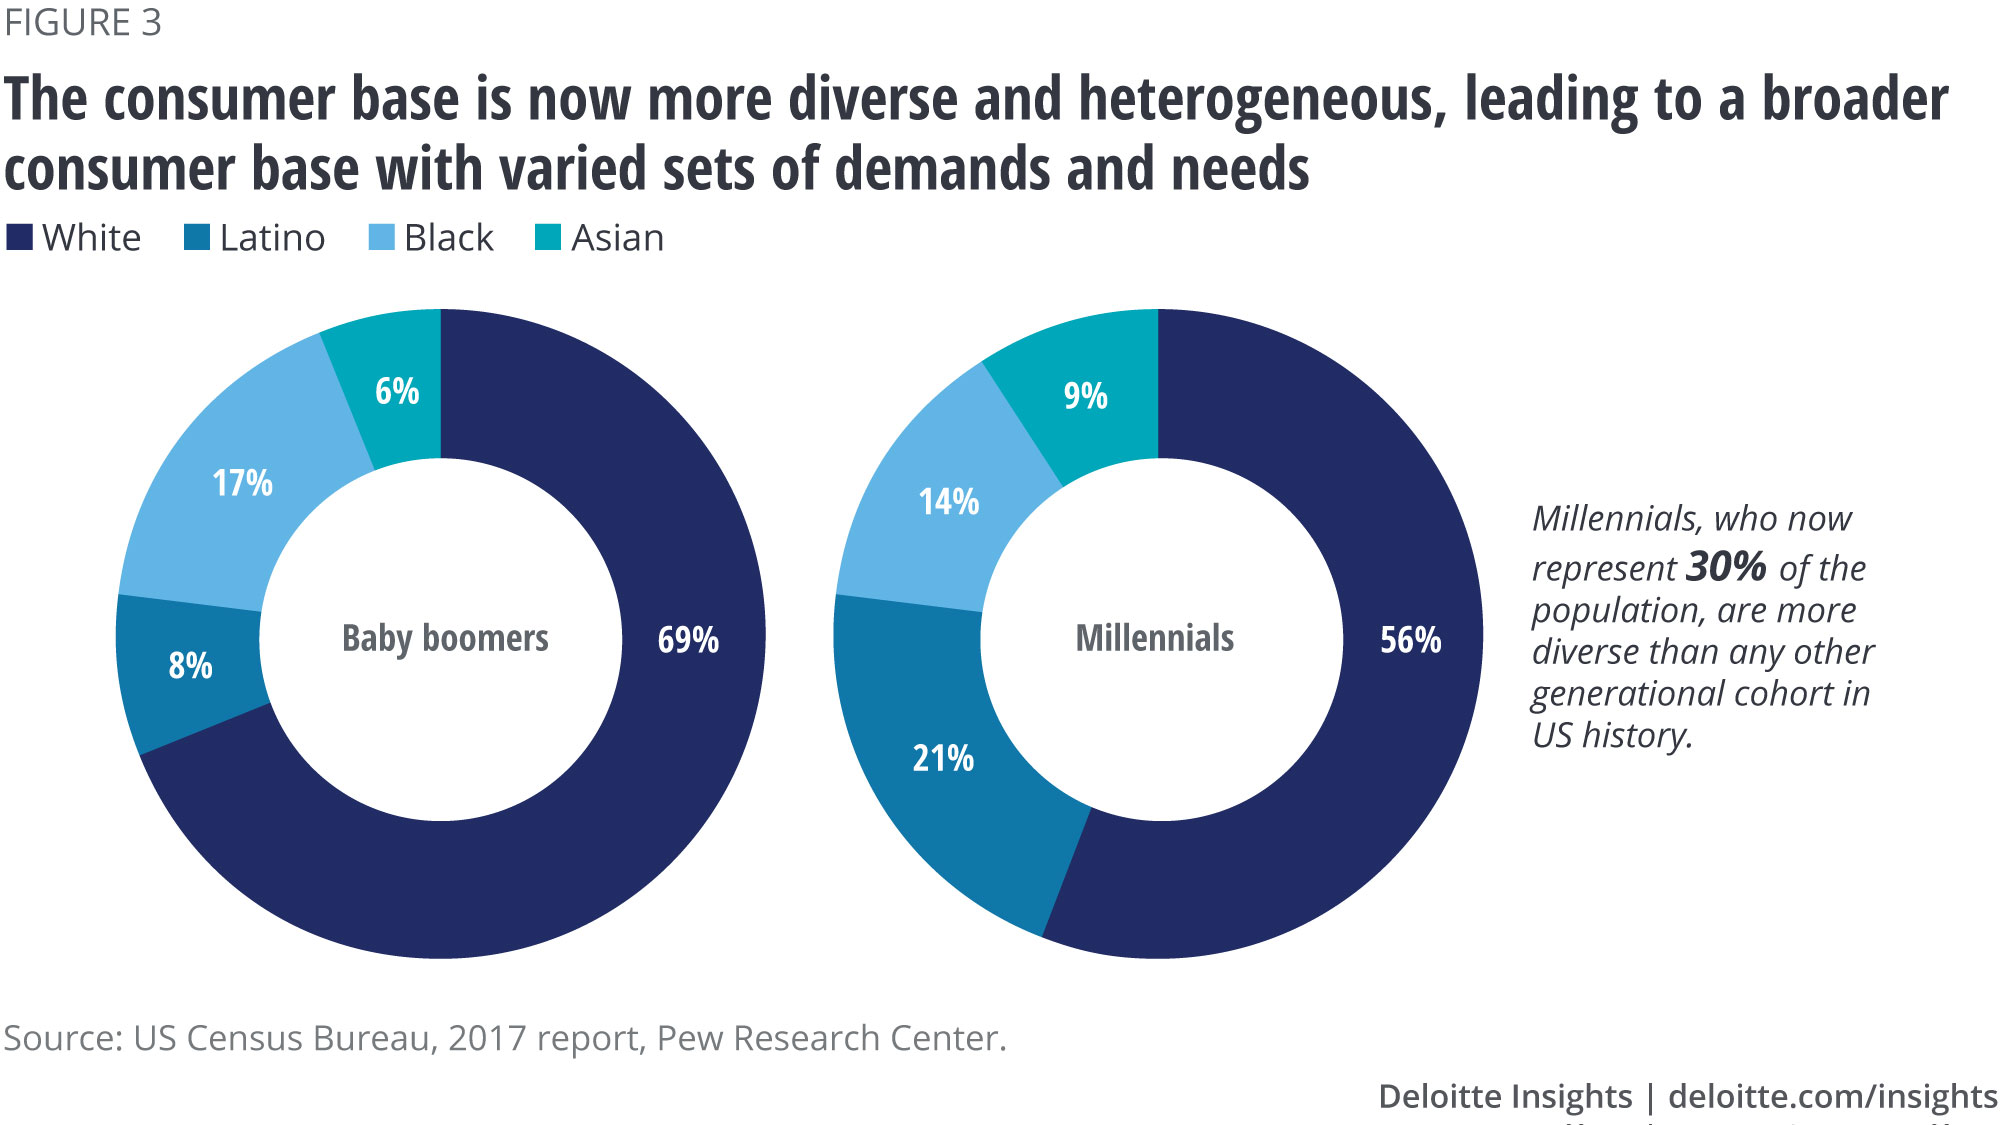 The consumer base is now more diverse and heterogeneous, leading to a broader consumer base with varied sets of demands and needs